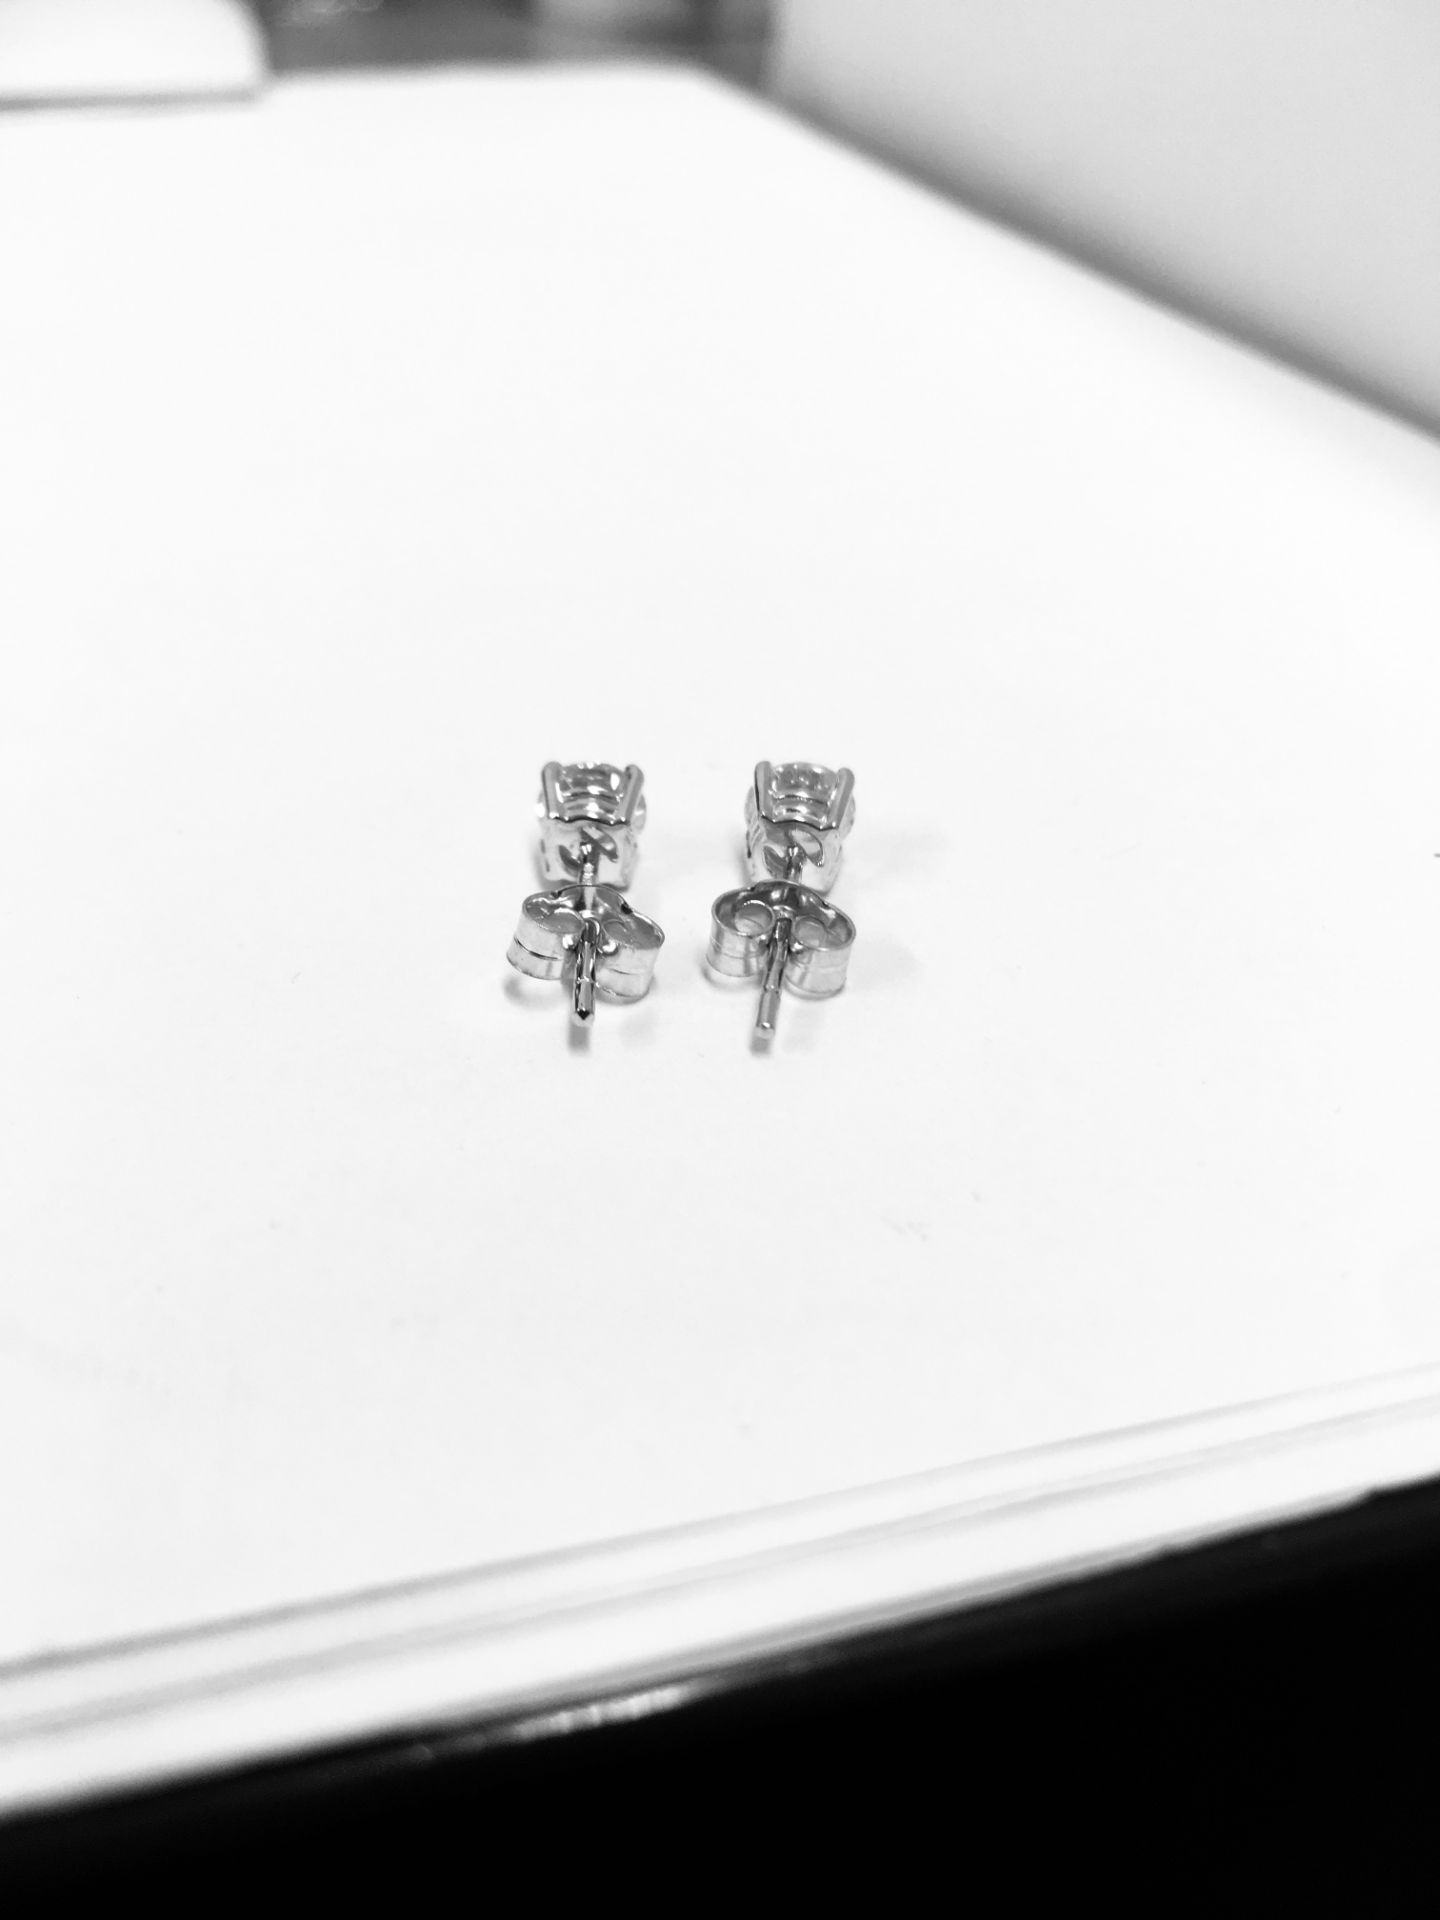 1.00ct diamond solitaire earrings set in 18ct white gold. 2 x brilliant cut diamonds, 0.50ct ( - Image 3 of 4